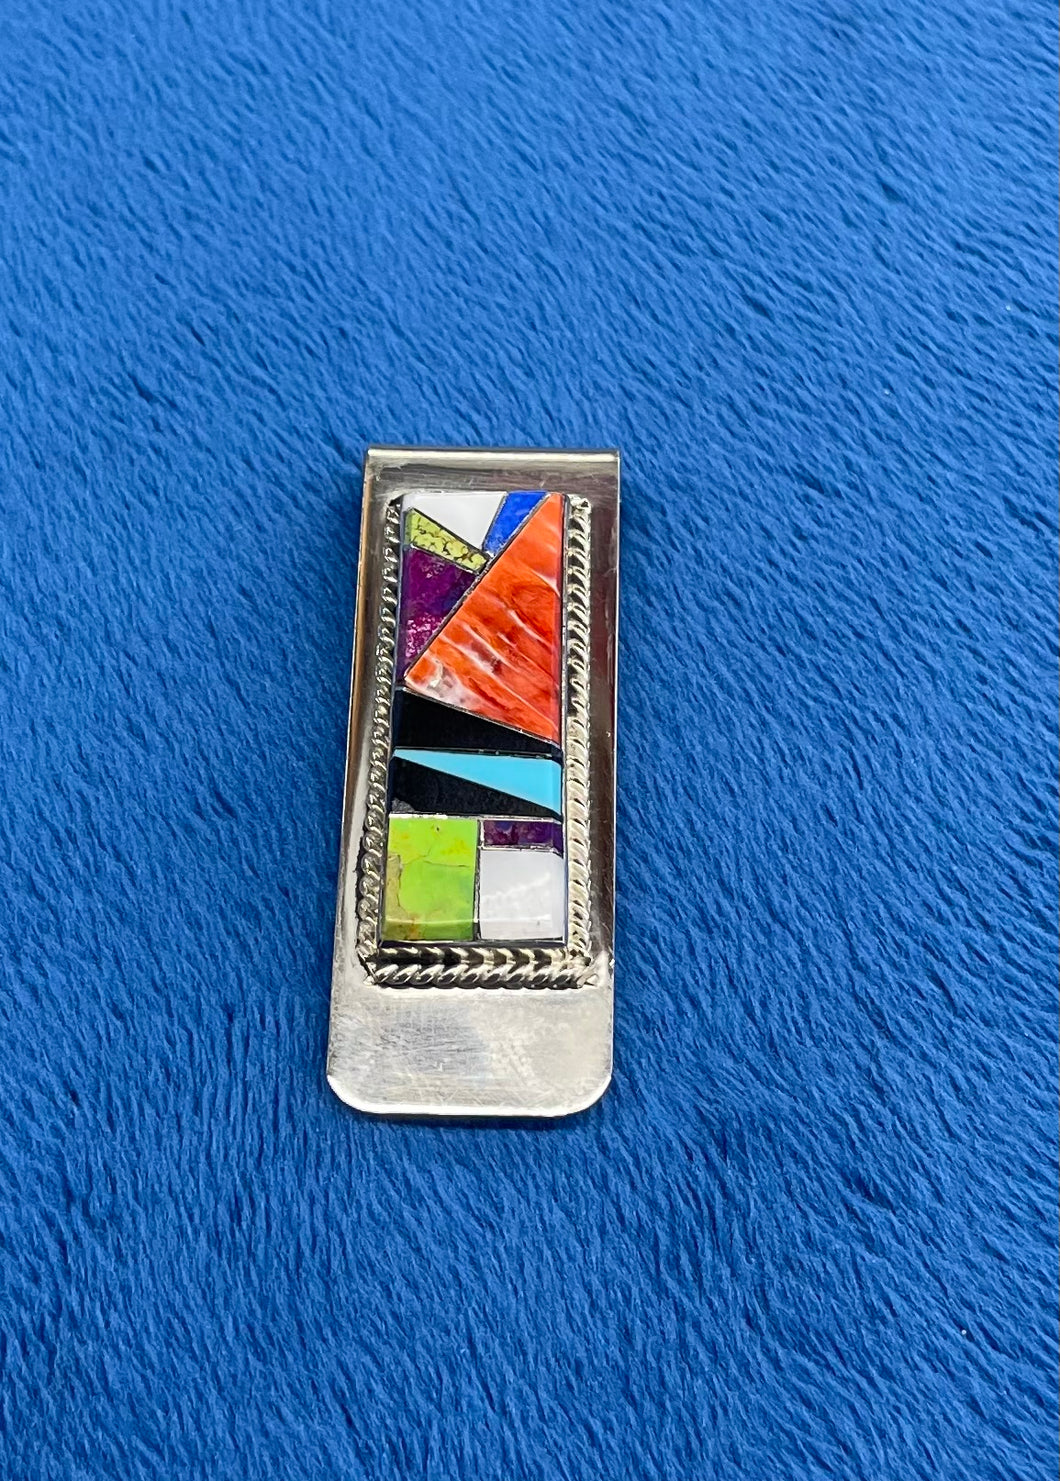 Inlay Stone and Silver Money Clip